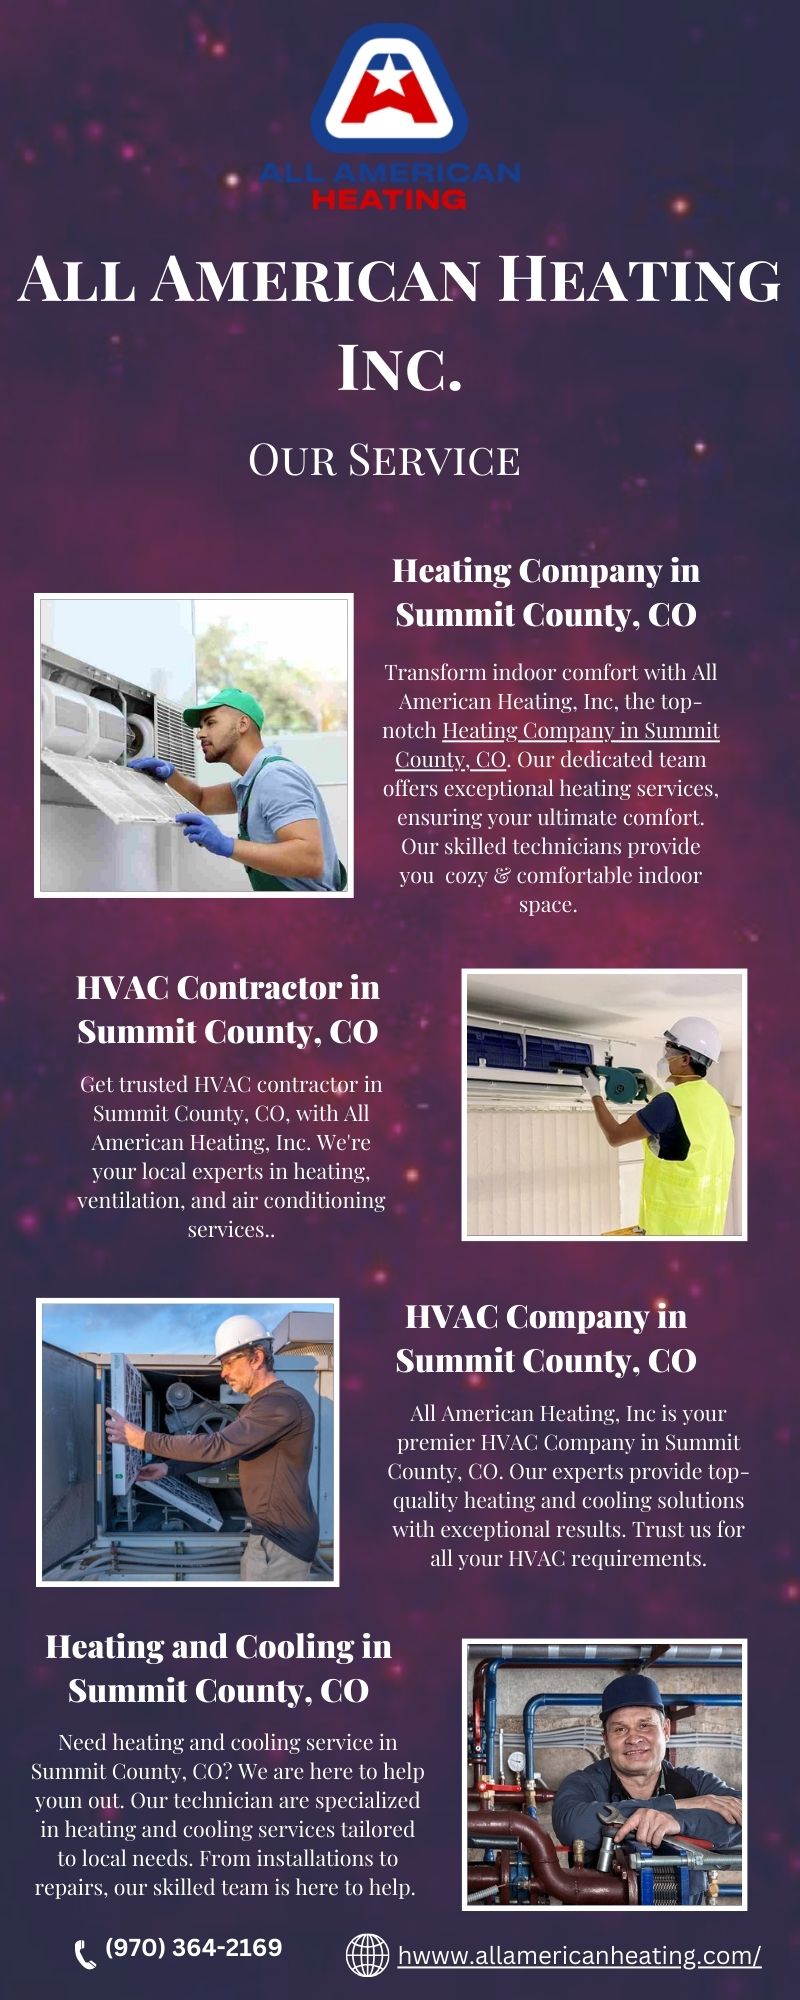 Heating Company in Summit County, CO by allamericanheating on DeviantArt